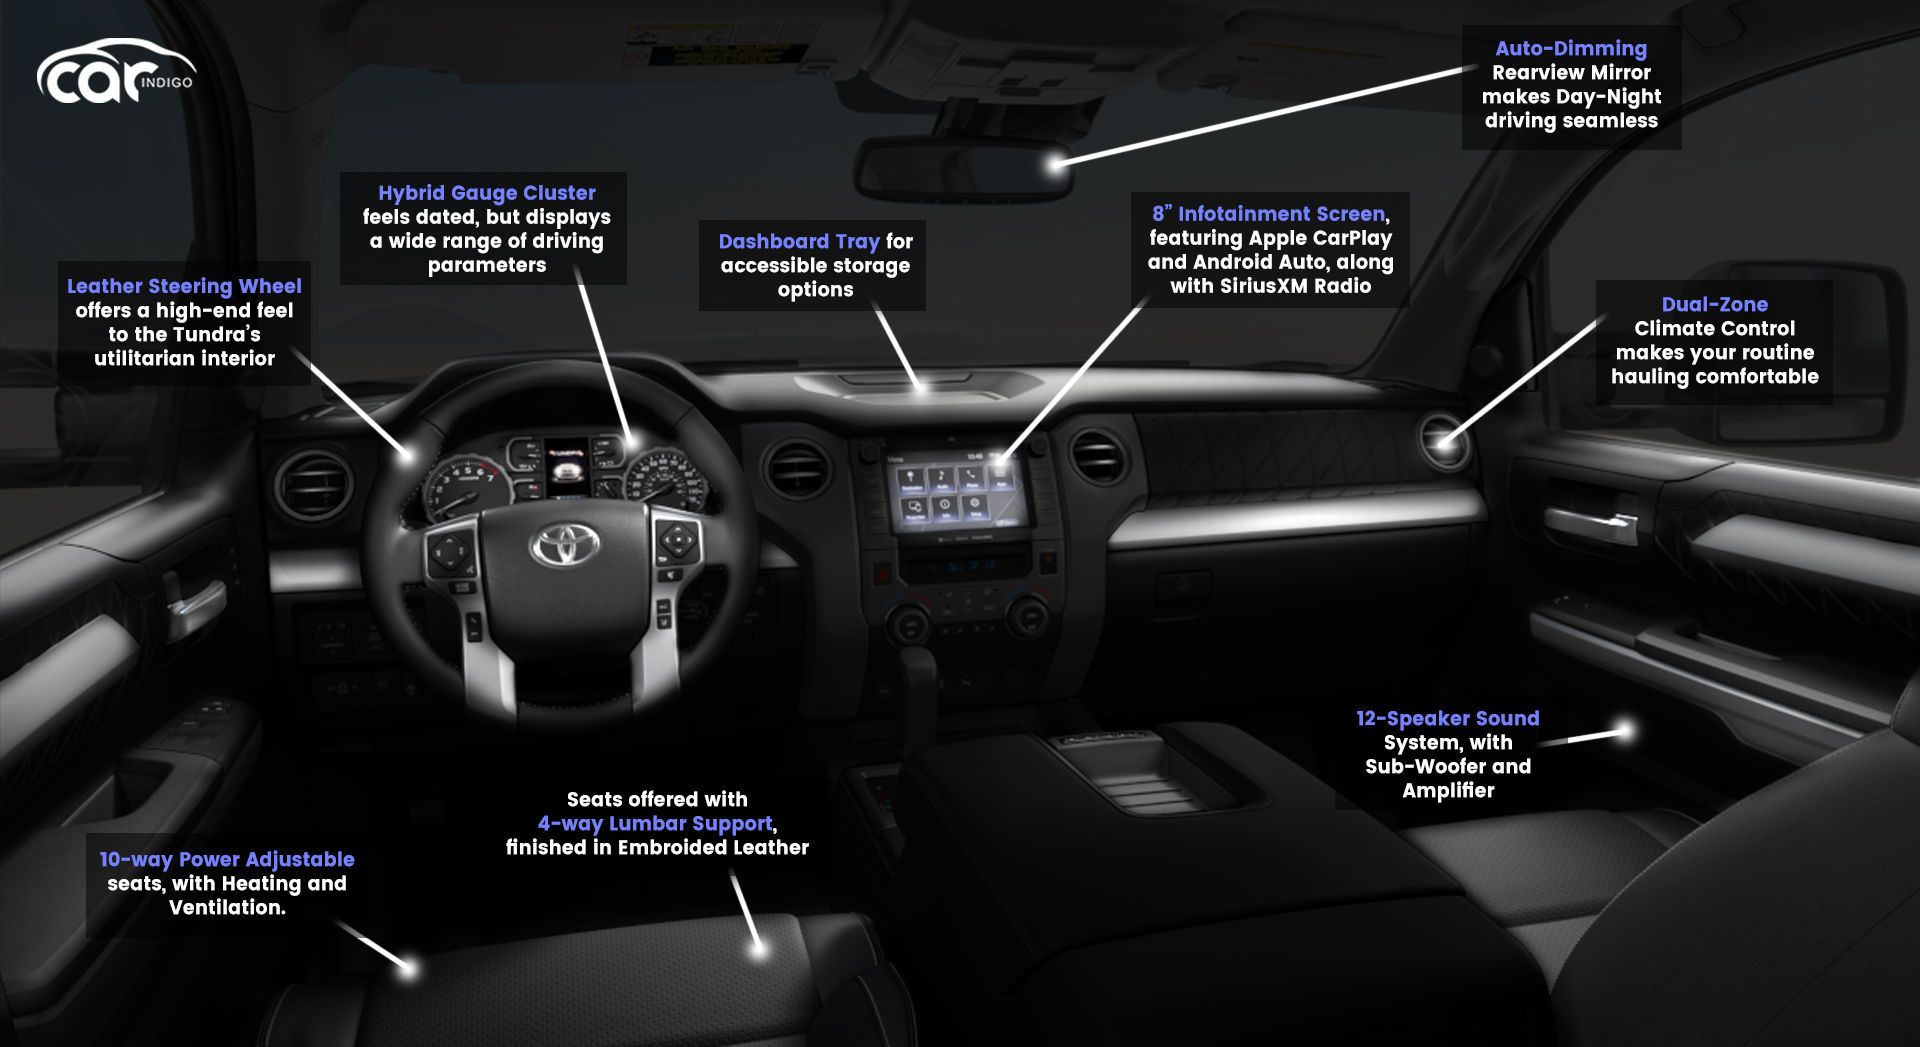 Toyota Tundra Interior Review, Infotainment, Dashboard and Features